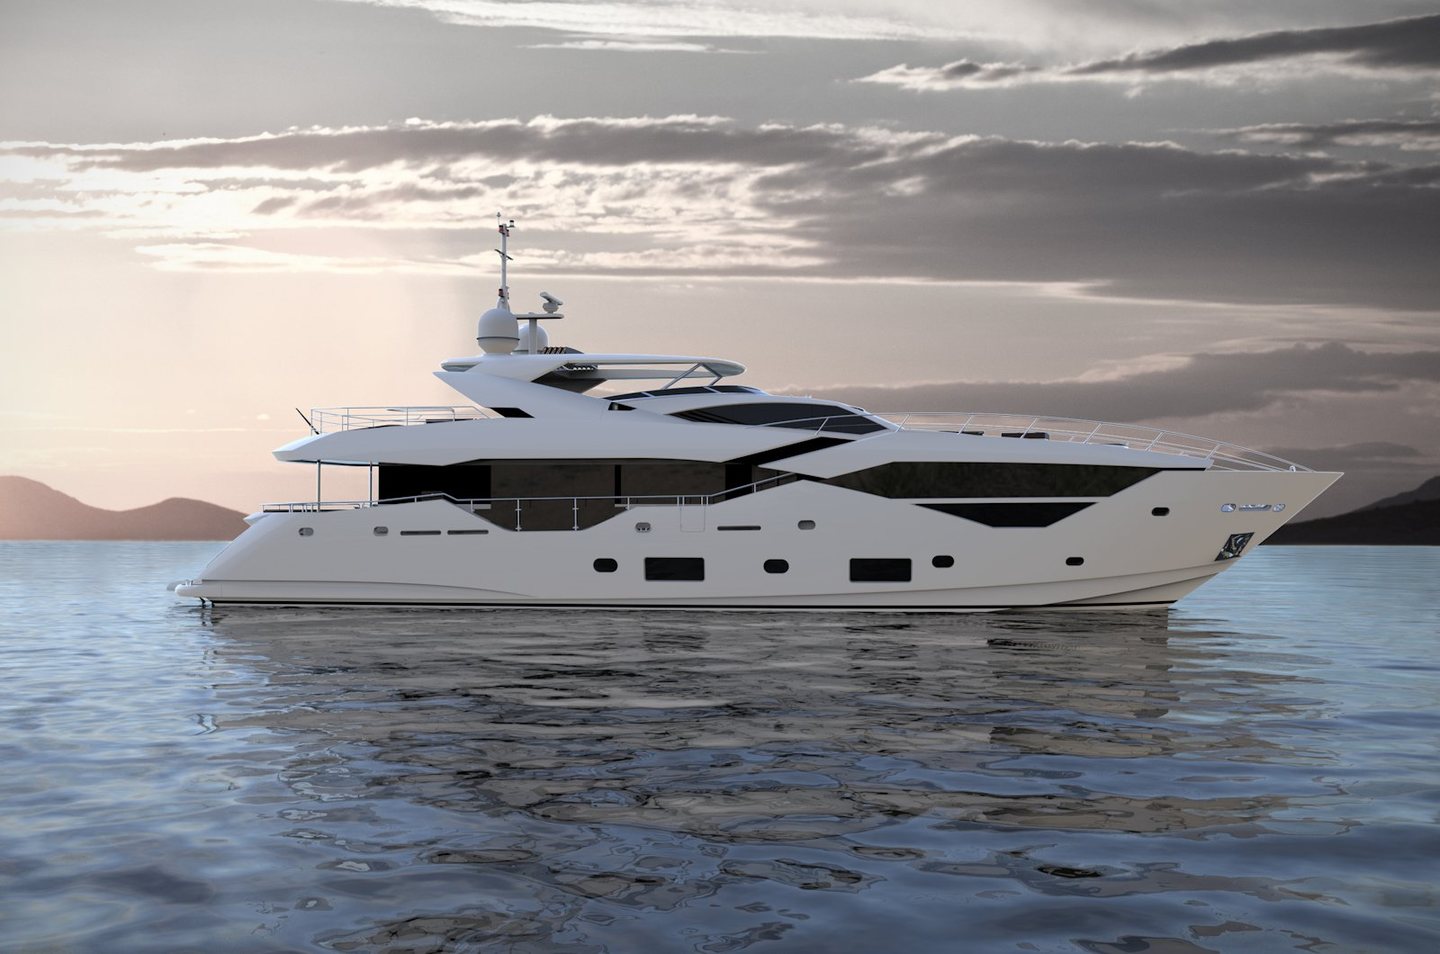 360 VR Virtual Tours of the Sunseeker 116 Yacht